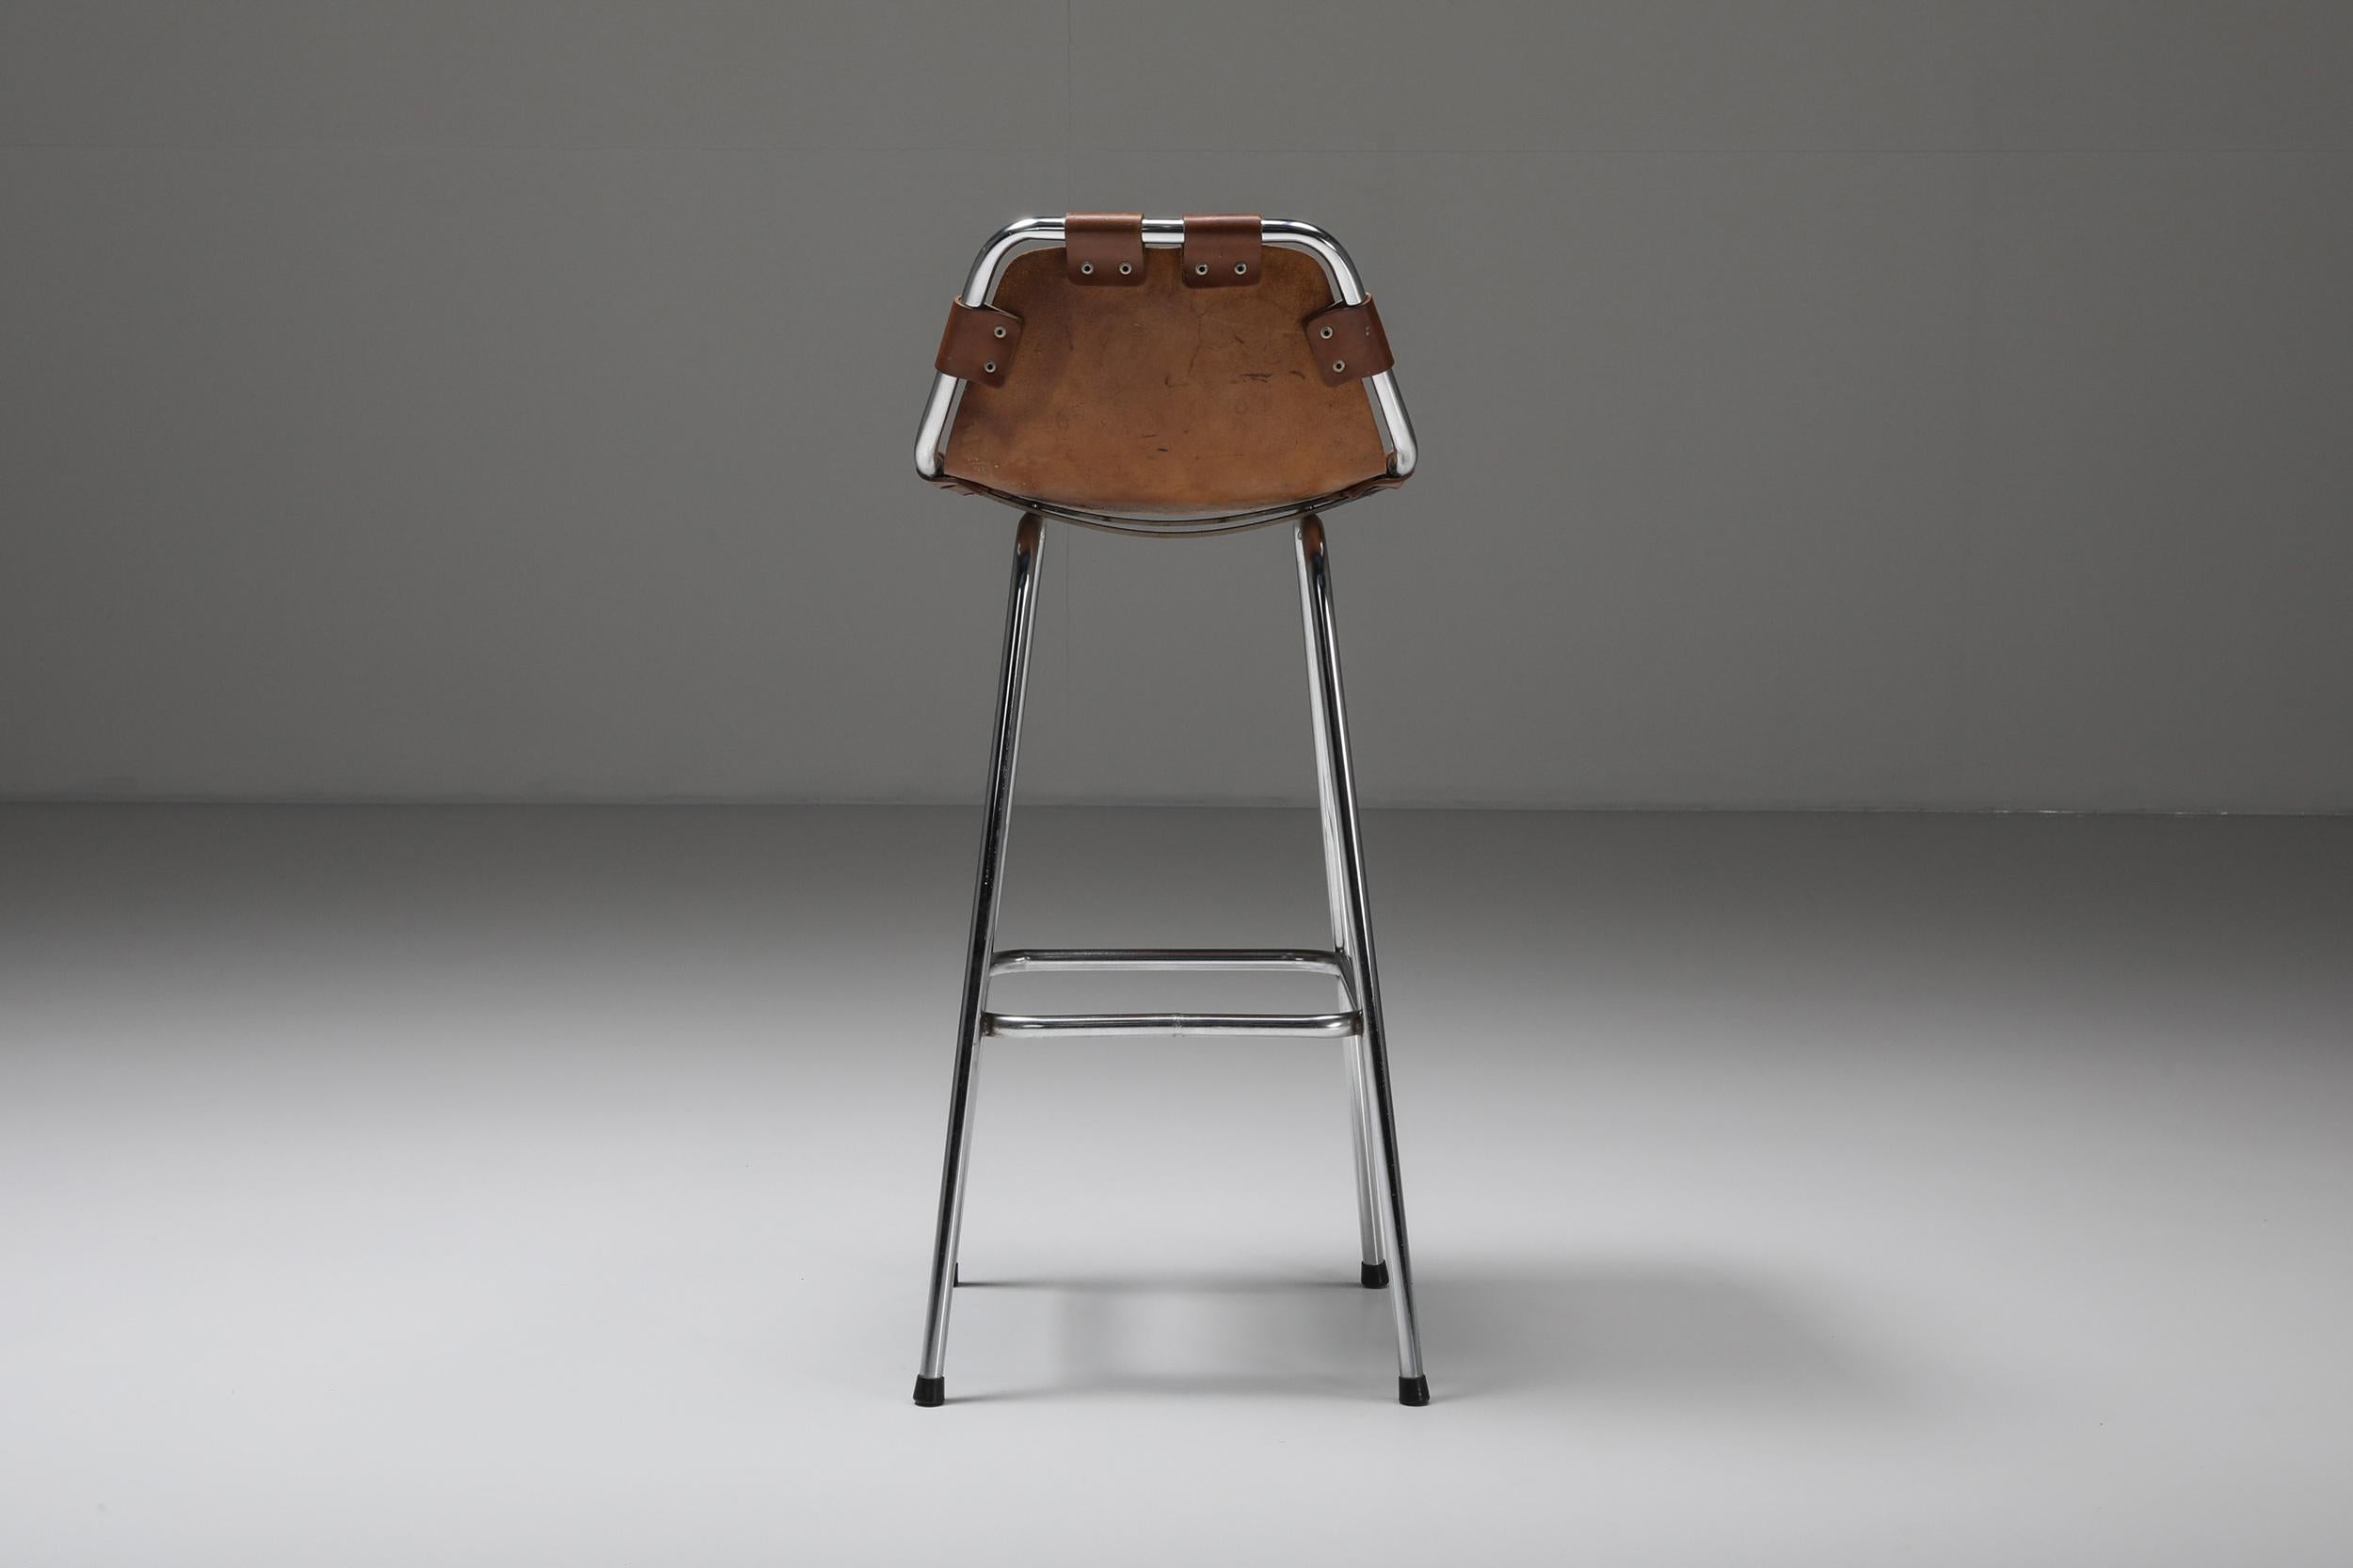 Cognac leather, chrome, attributed to Charlotte Perriand, France, 1960s

A Charlotte Perriand stool that is very unusual and sought after, designed by Perriand for and used in the Ski Resort Les Arcs, circa 1960. Very nice chrome tubular frame